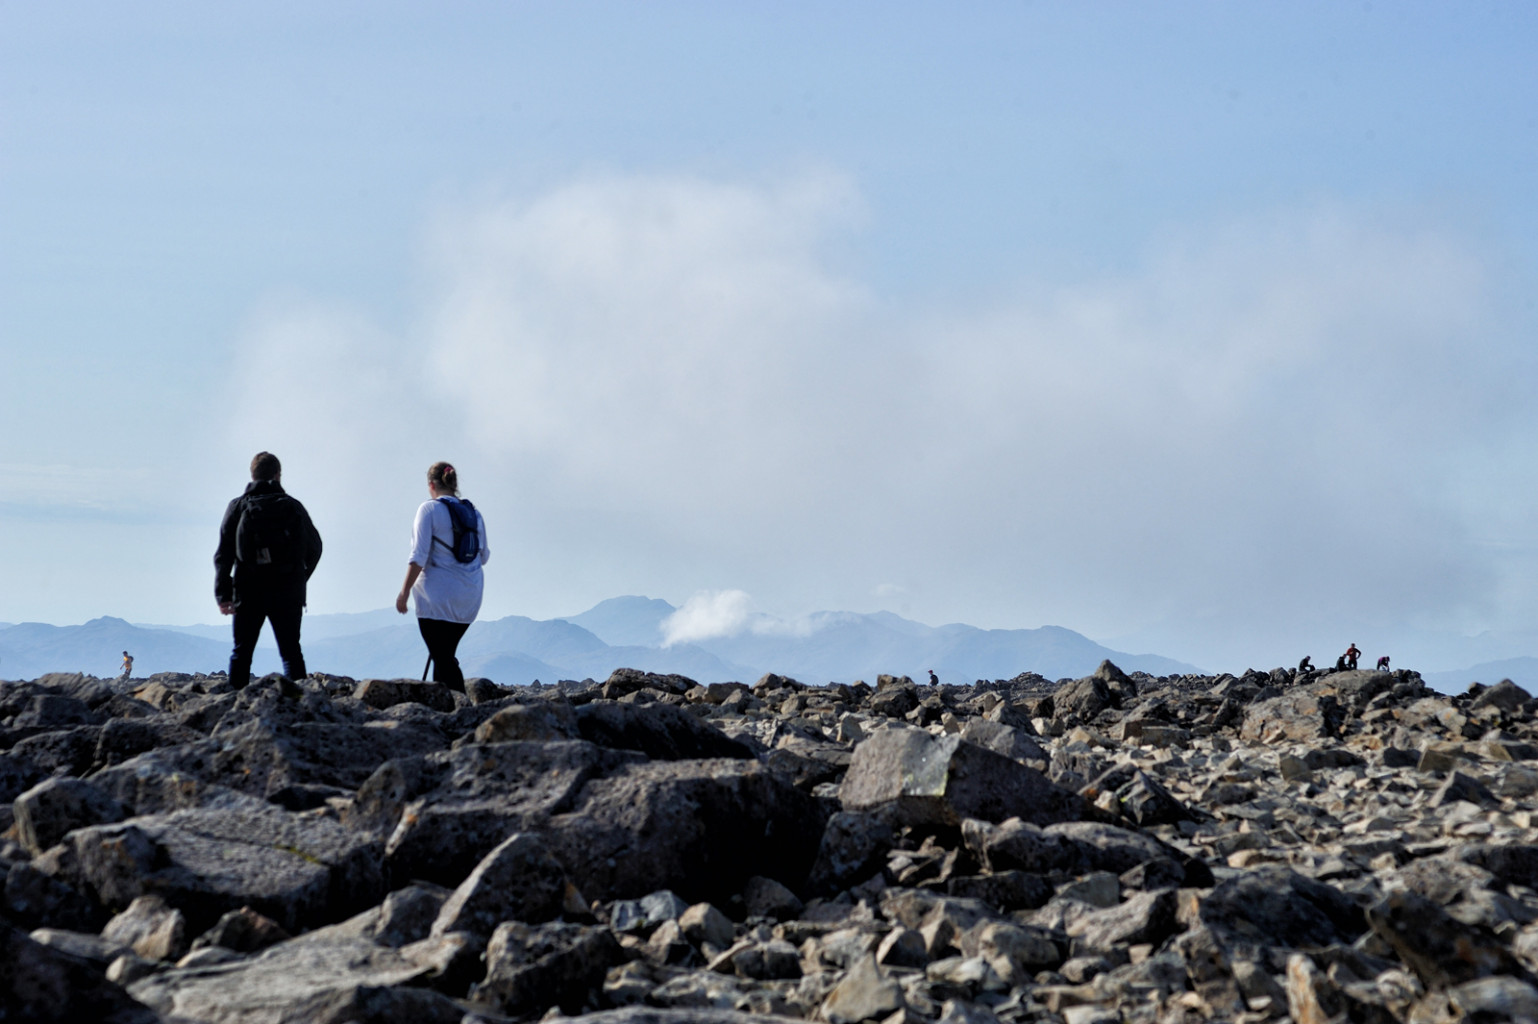 Two people standing in the rocky landscape of the summit of Ben Nevis, Scotland.